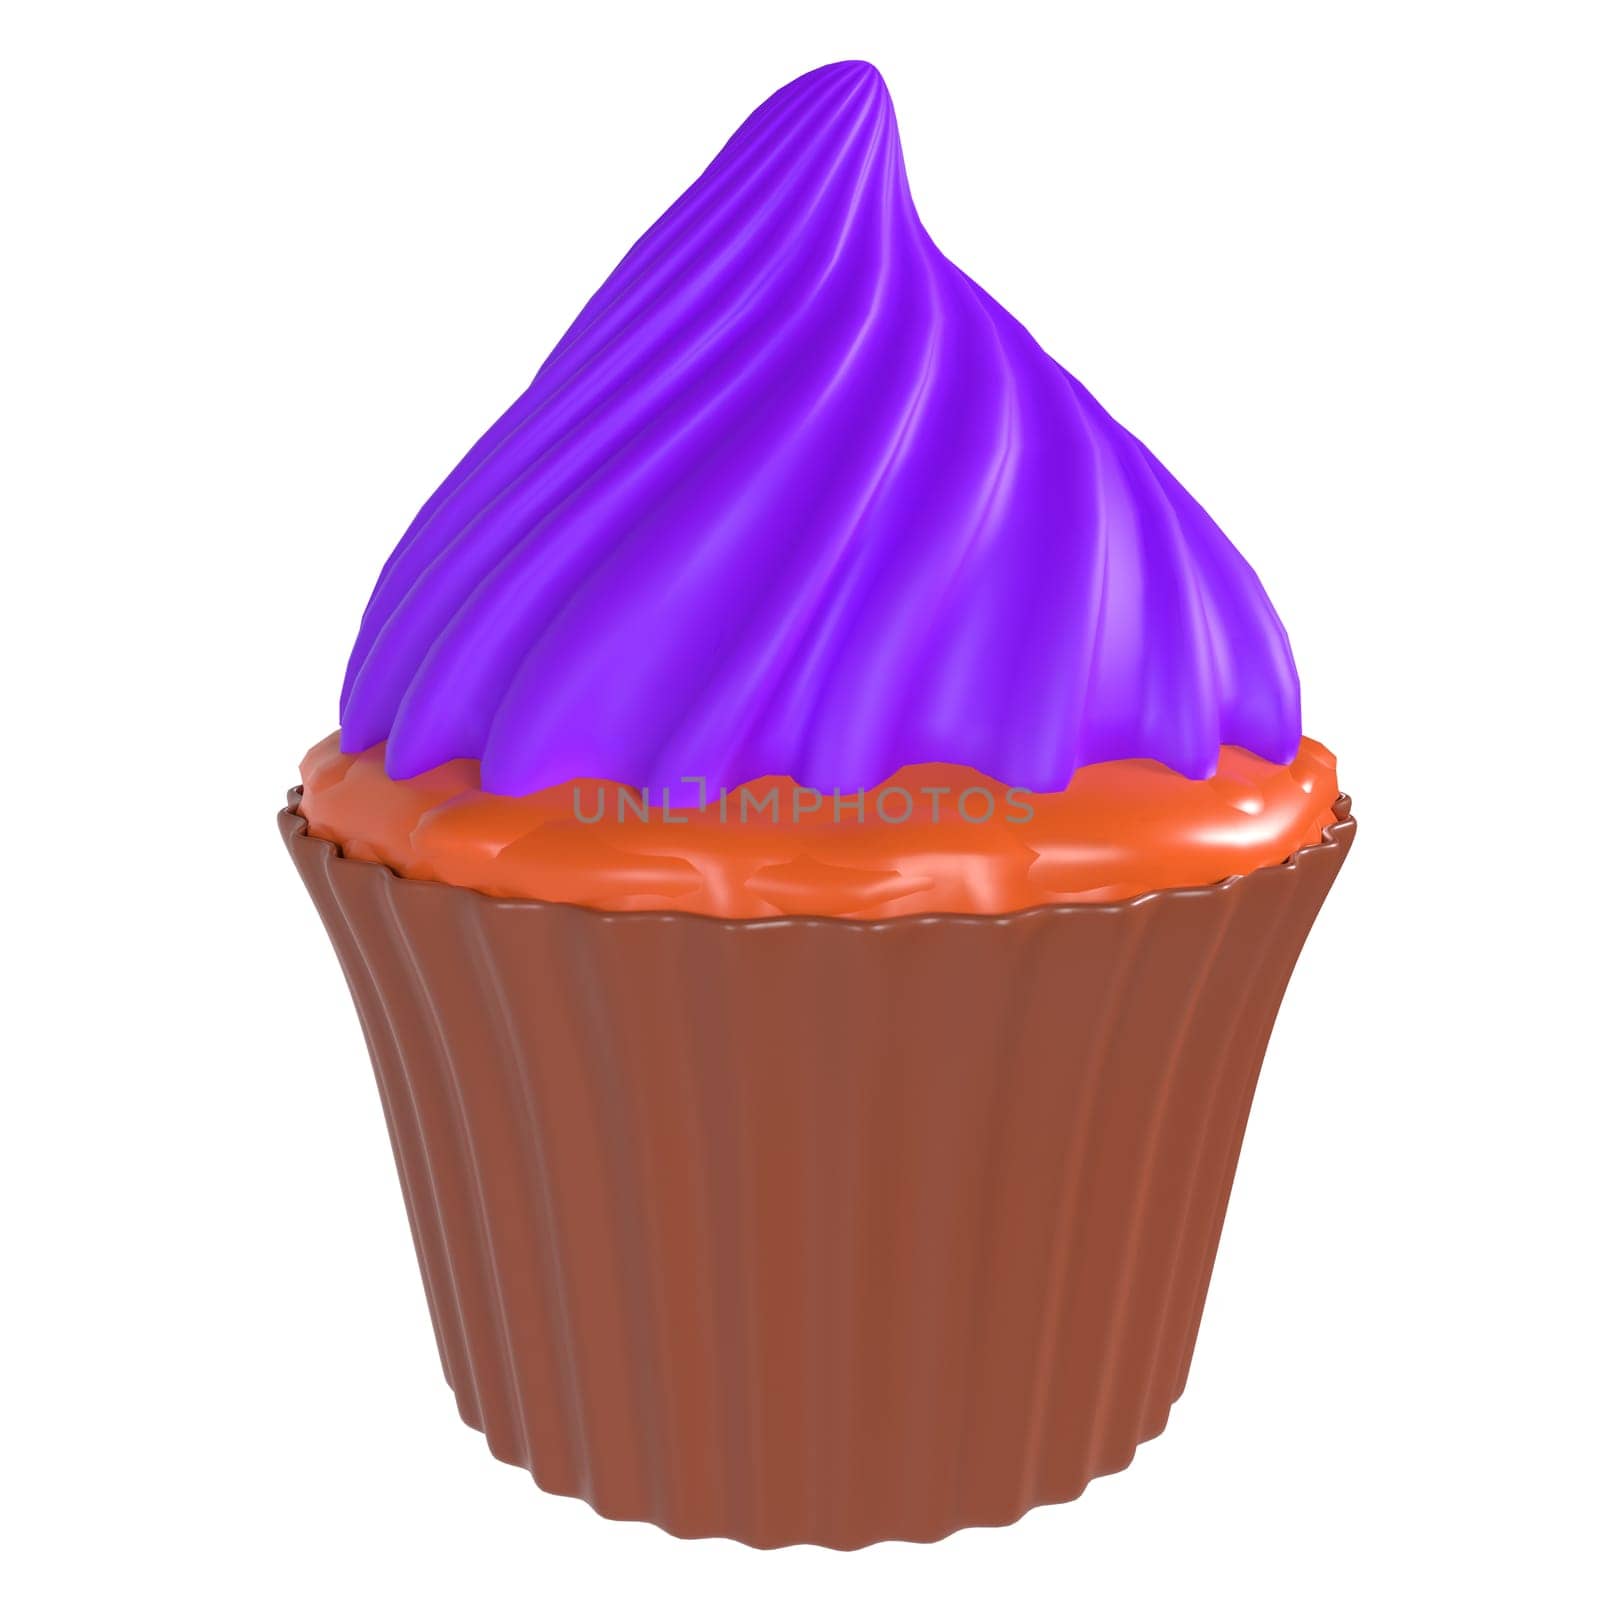 Cupcake isolated on white background. High quality 3d illustration